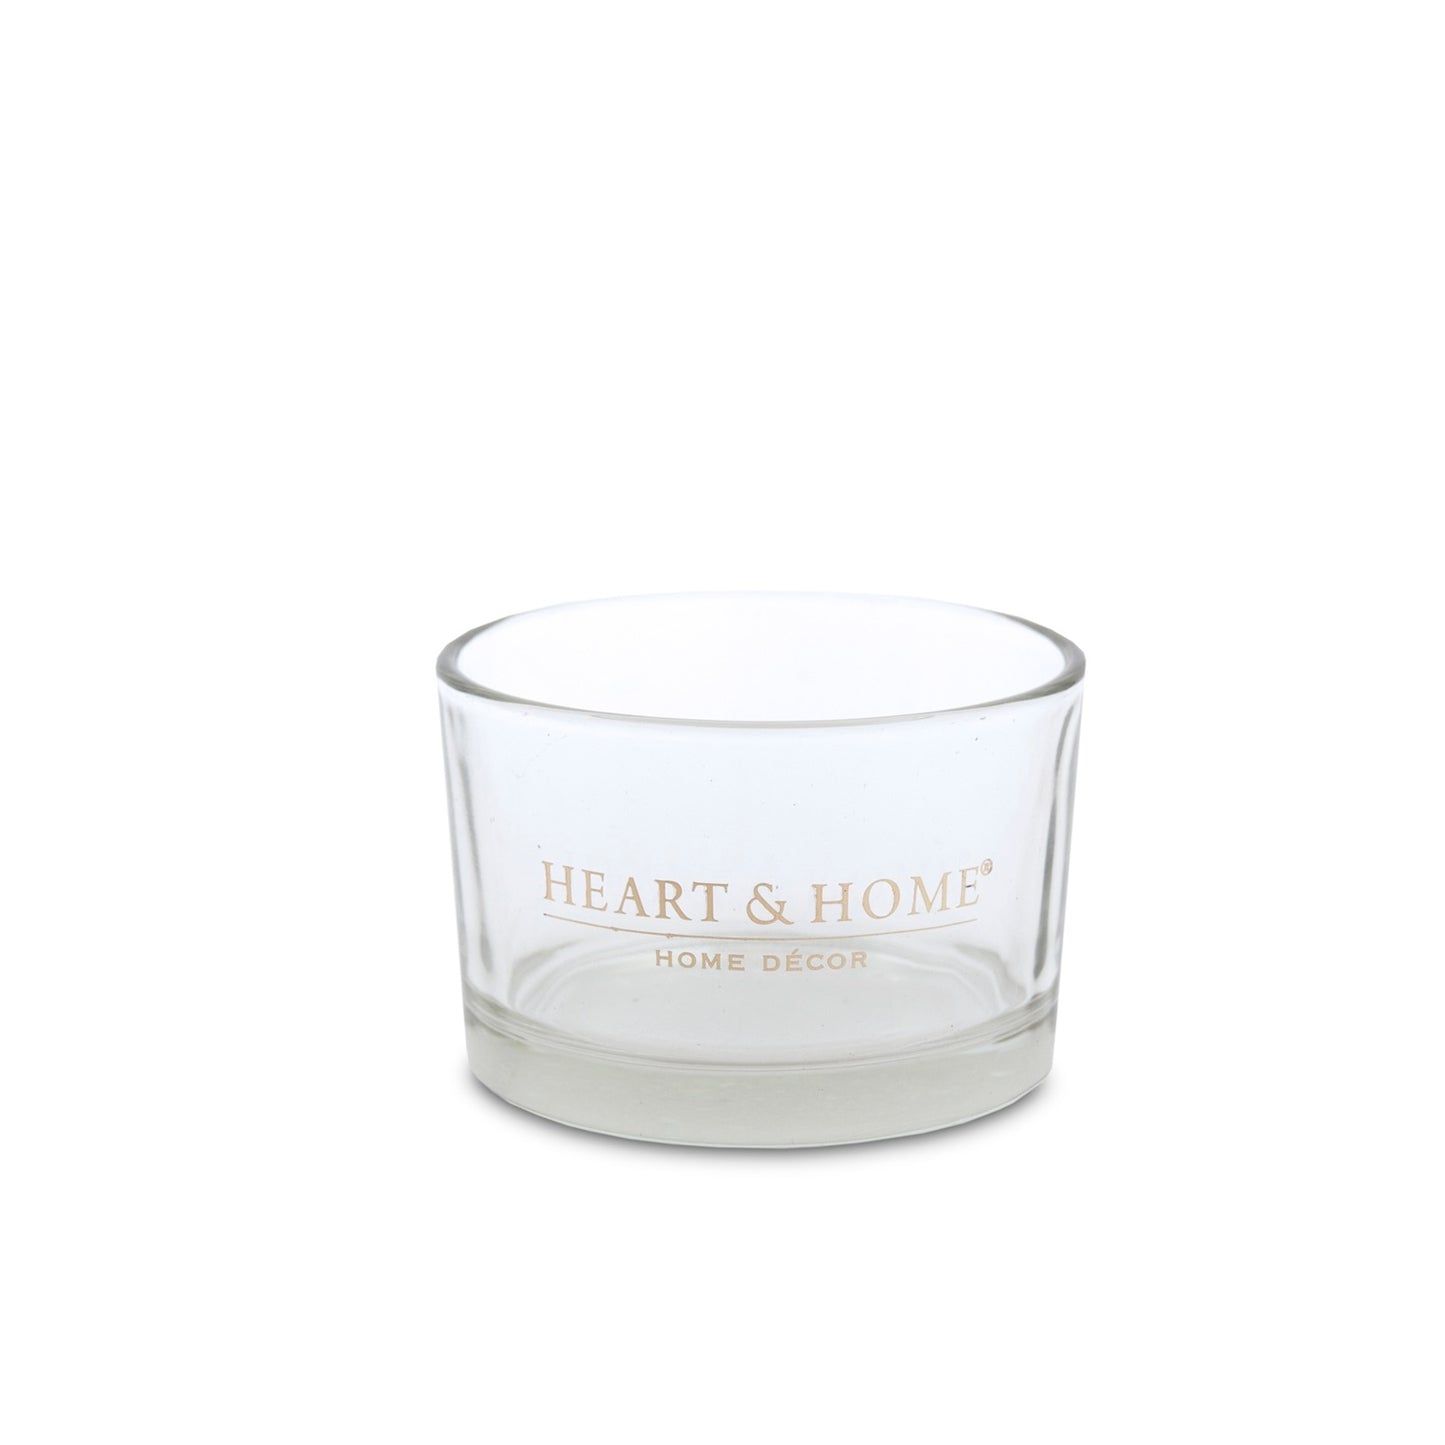 Heart & Home Scent Cup Holder in Glass